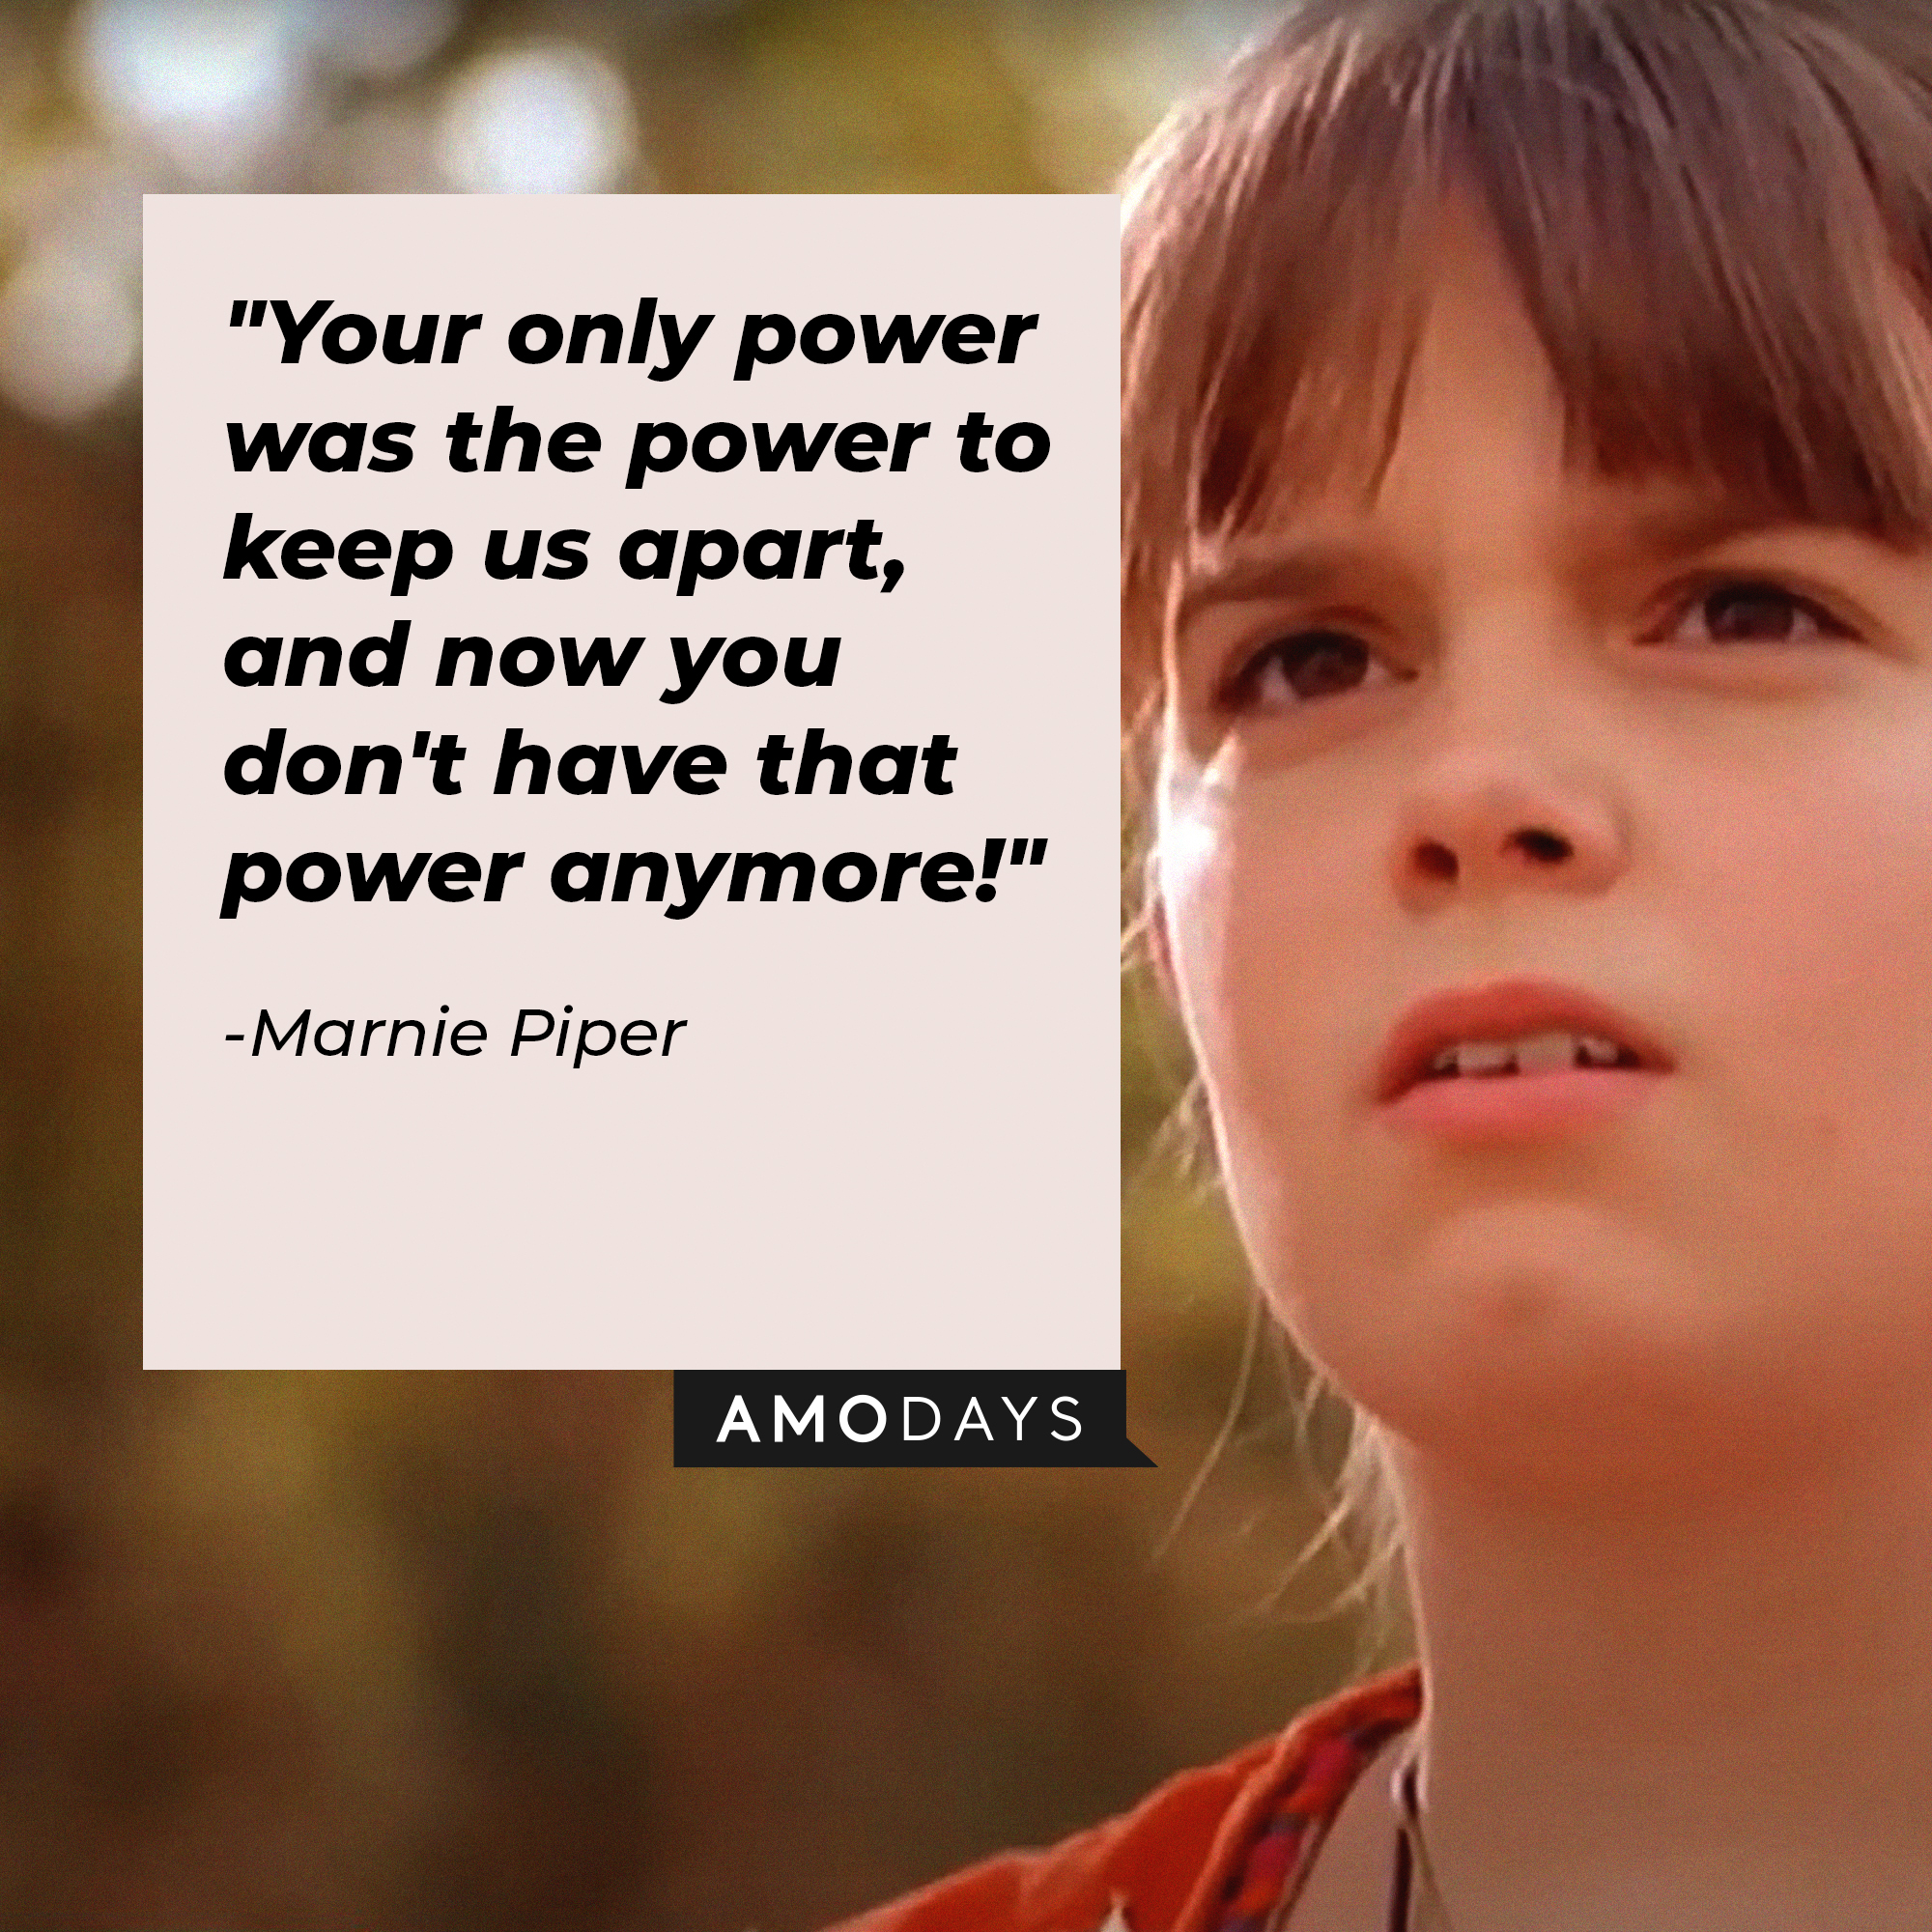 Marnie Piper's quote: "Your only power was the power to keep us apart, and now you don't have that power anymore!" | Source: Youtube.com/disneychannel